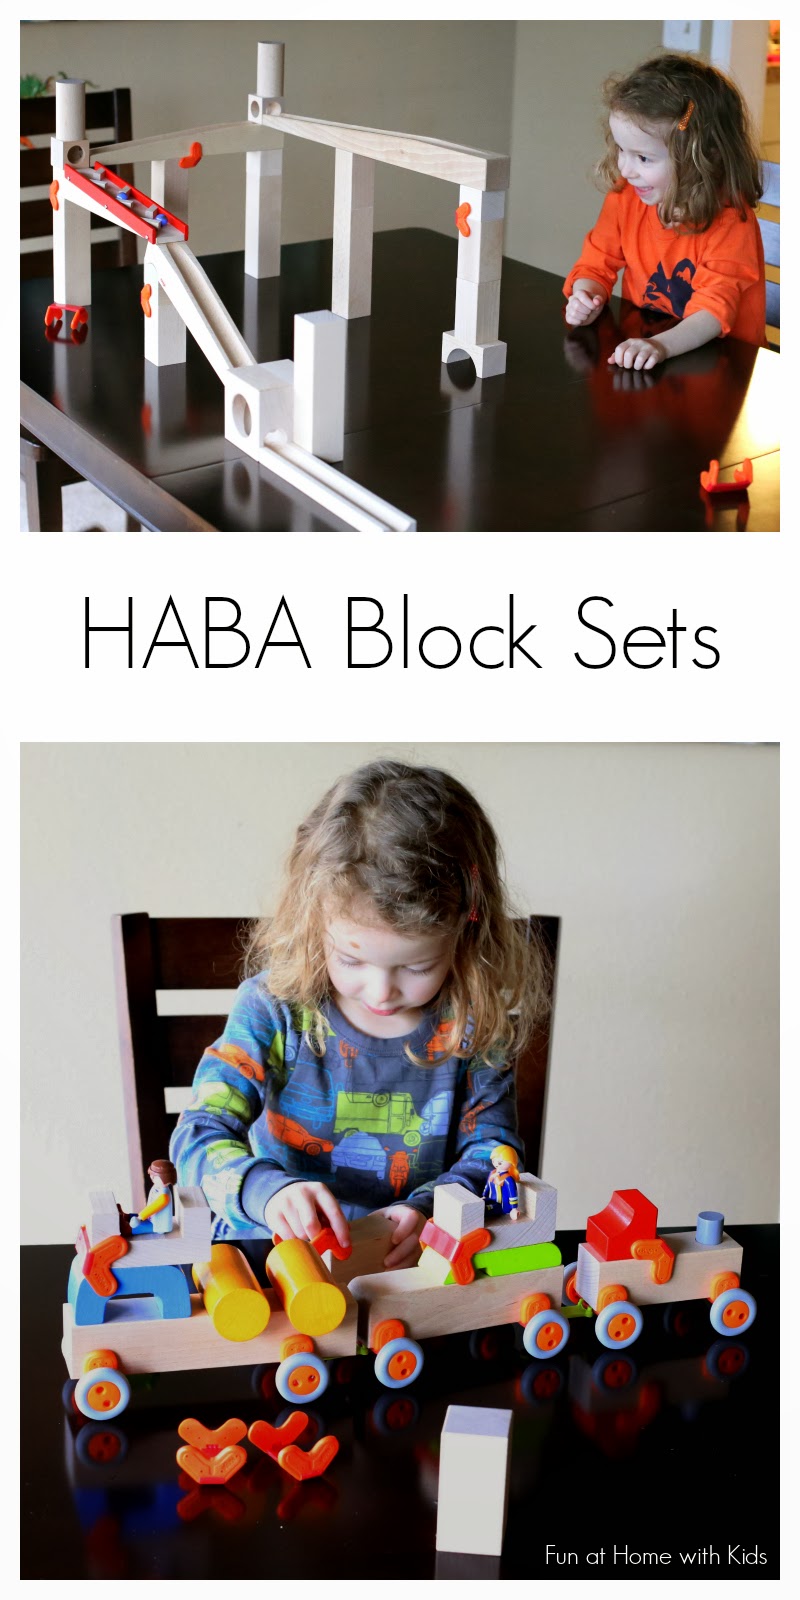 A review of HABA's block sets that encourage learning about scientific concepts through play from Fun at Home with Kids